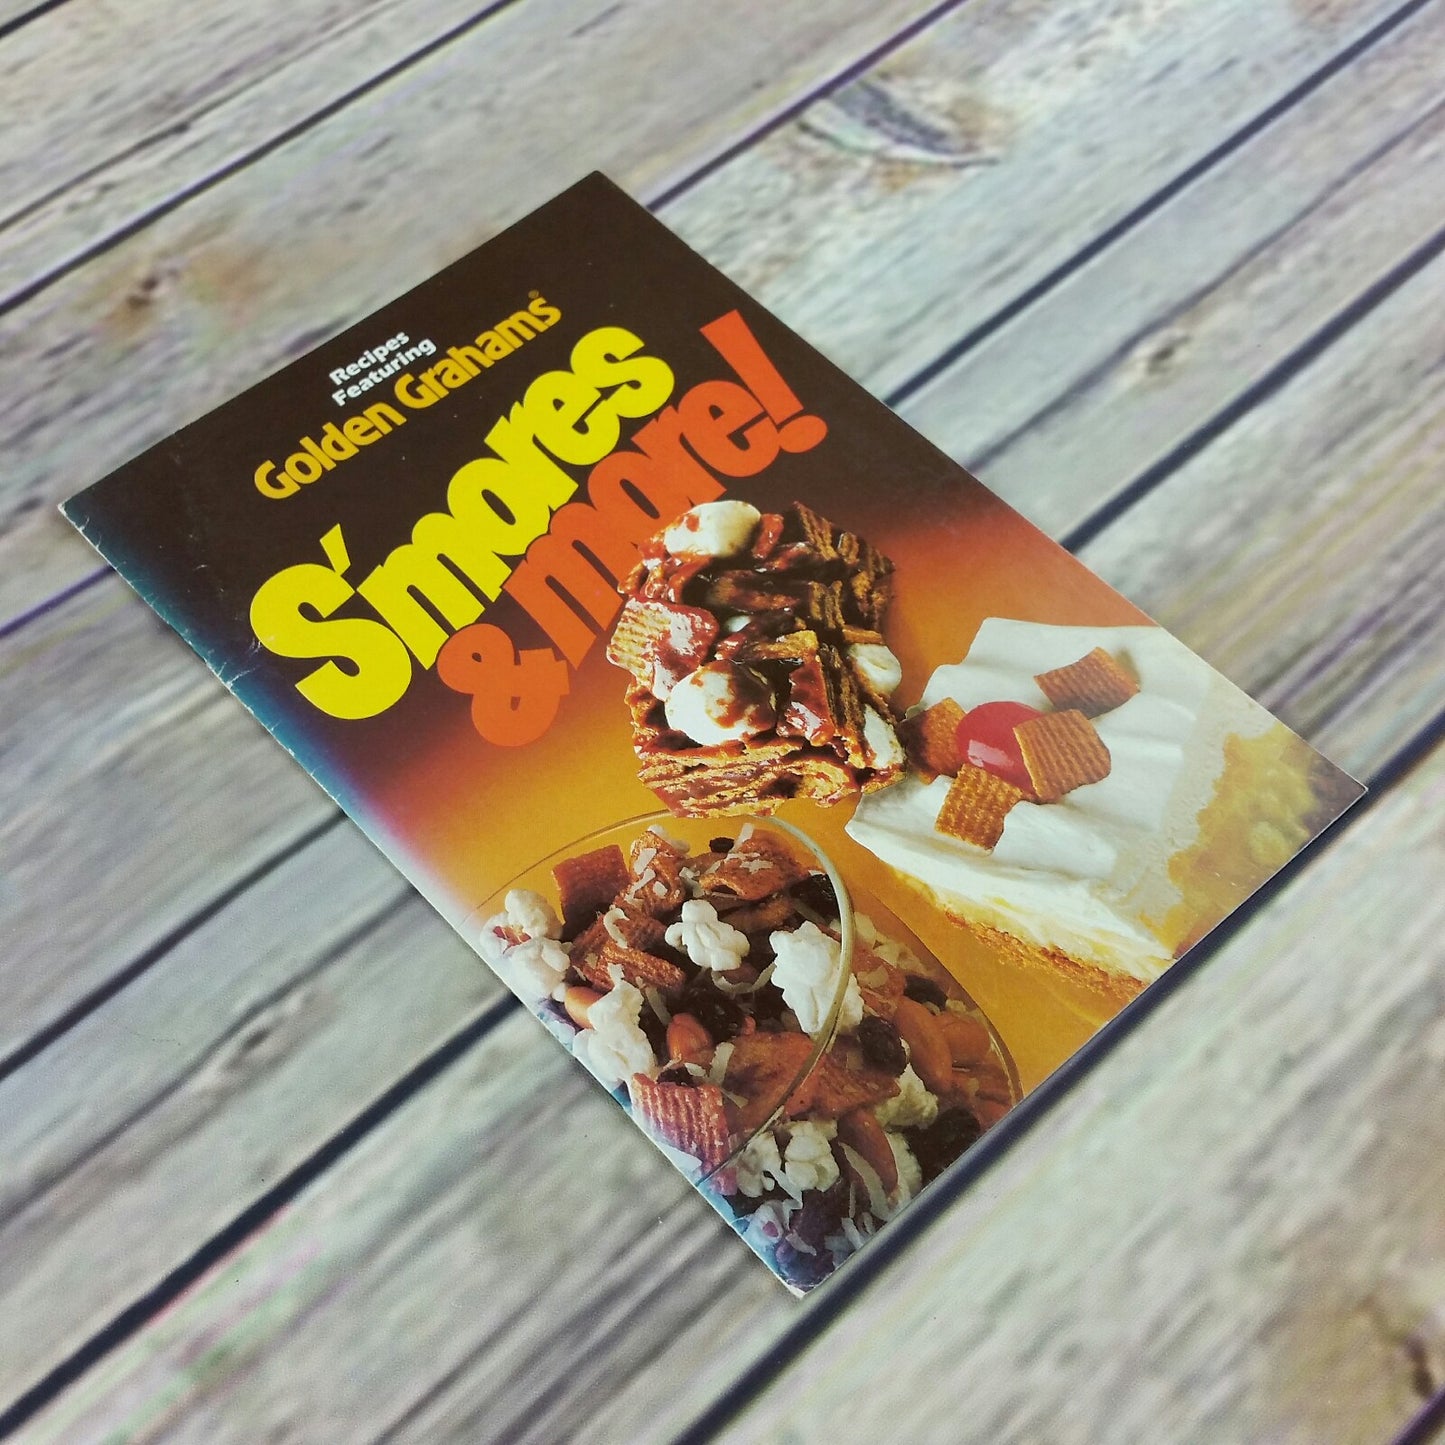 Vintage Cookbook Golden Grahams Smores and More Recipes 1979 Promo - At Grandma's Table